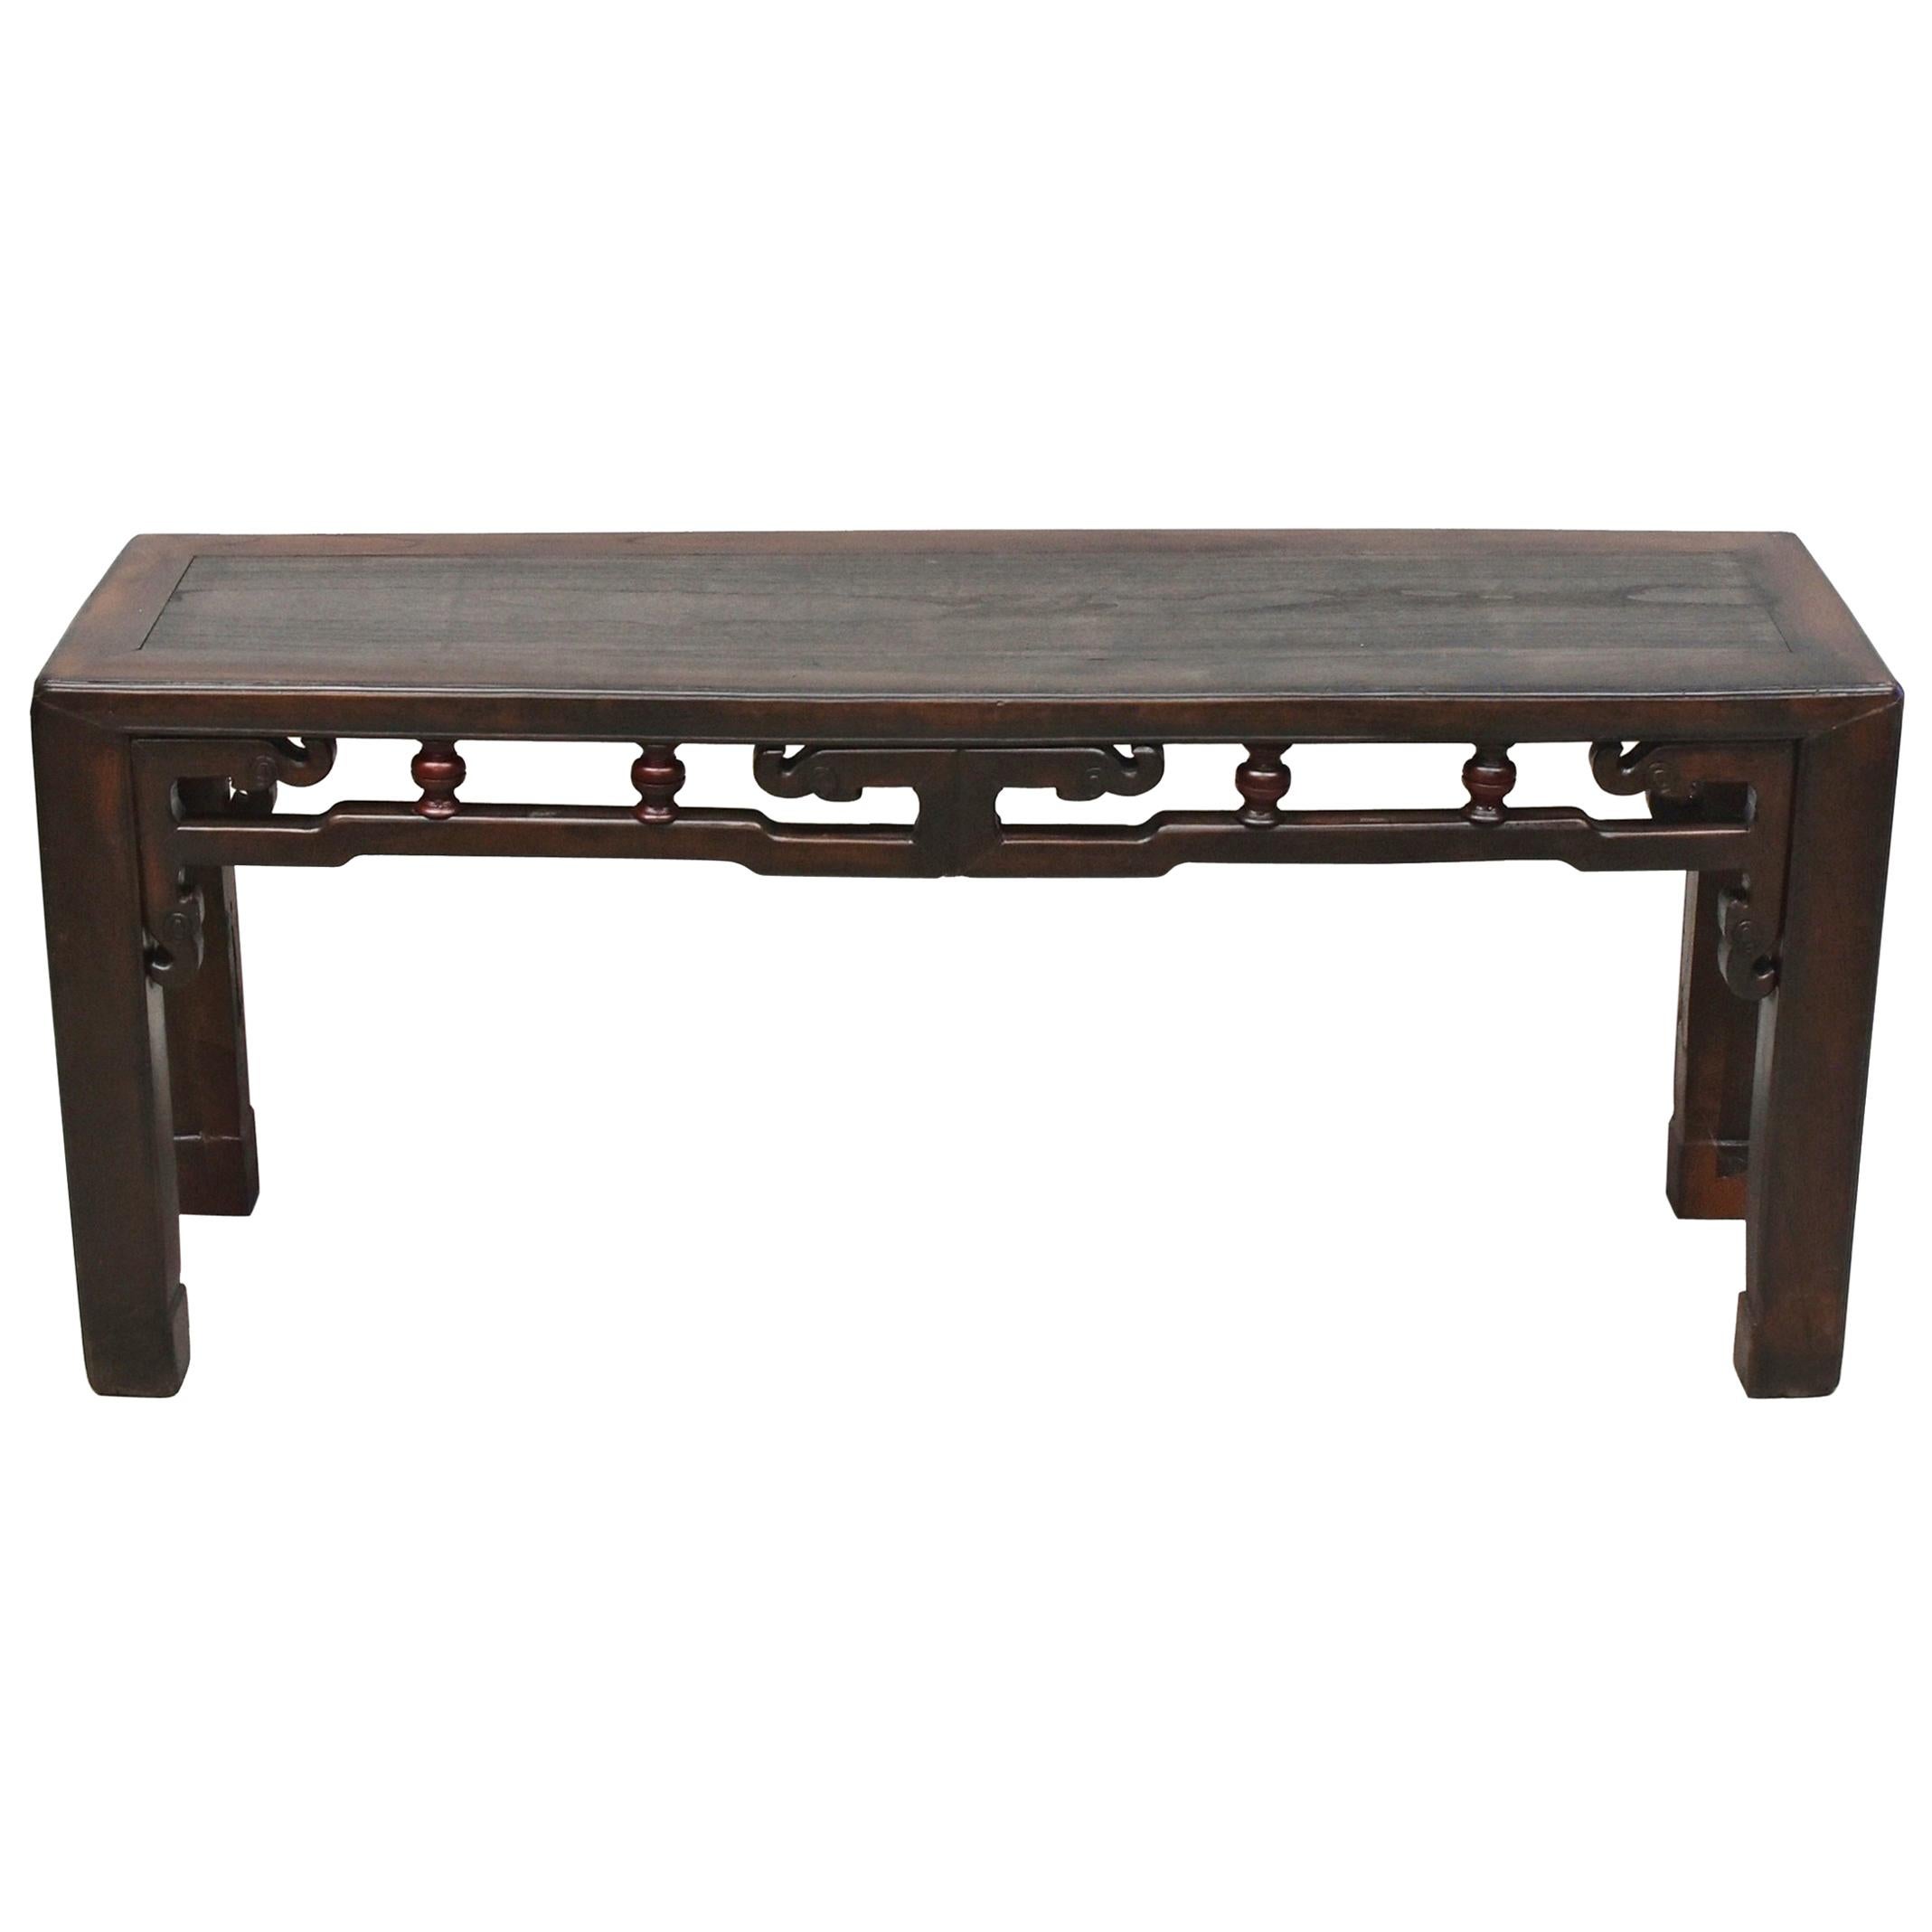 Antique Chinese Bench, Solid Wood, Dragon and Circle